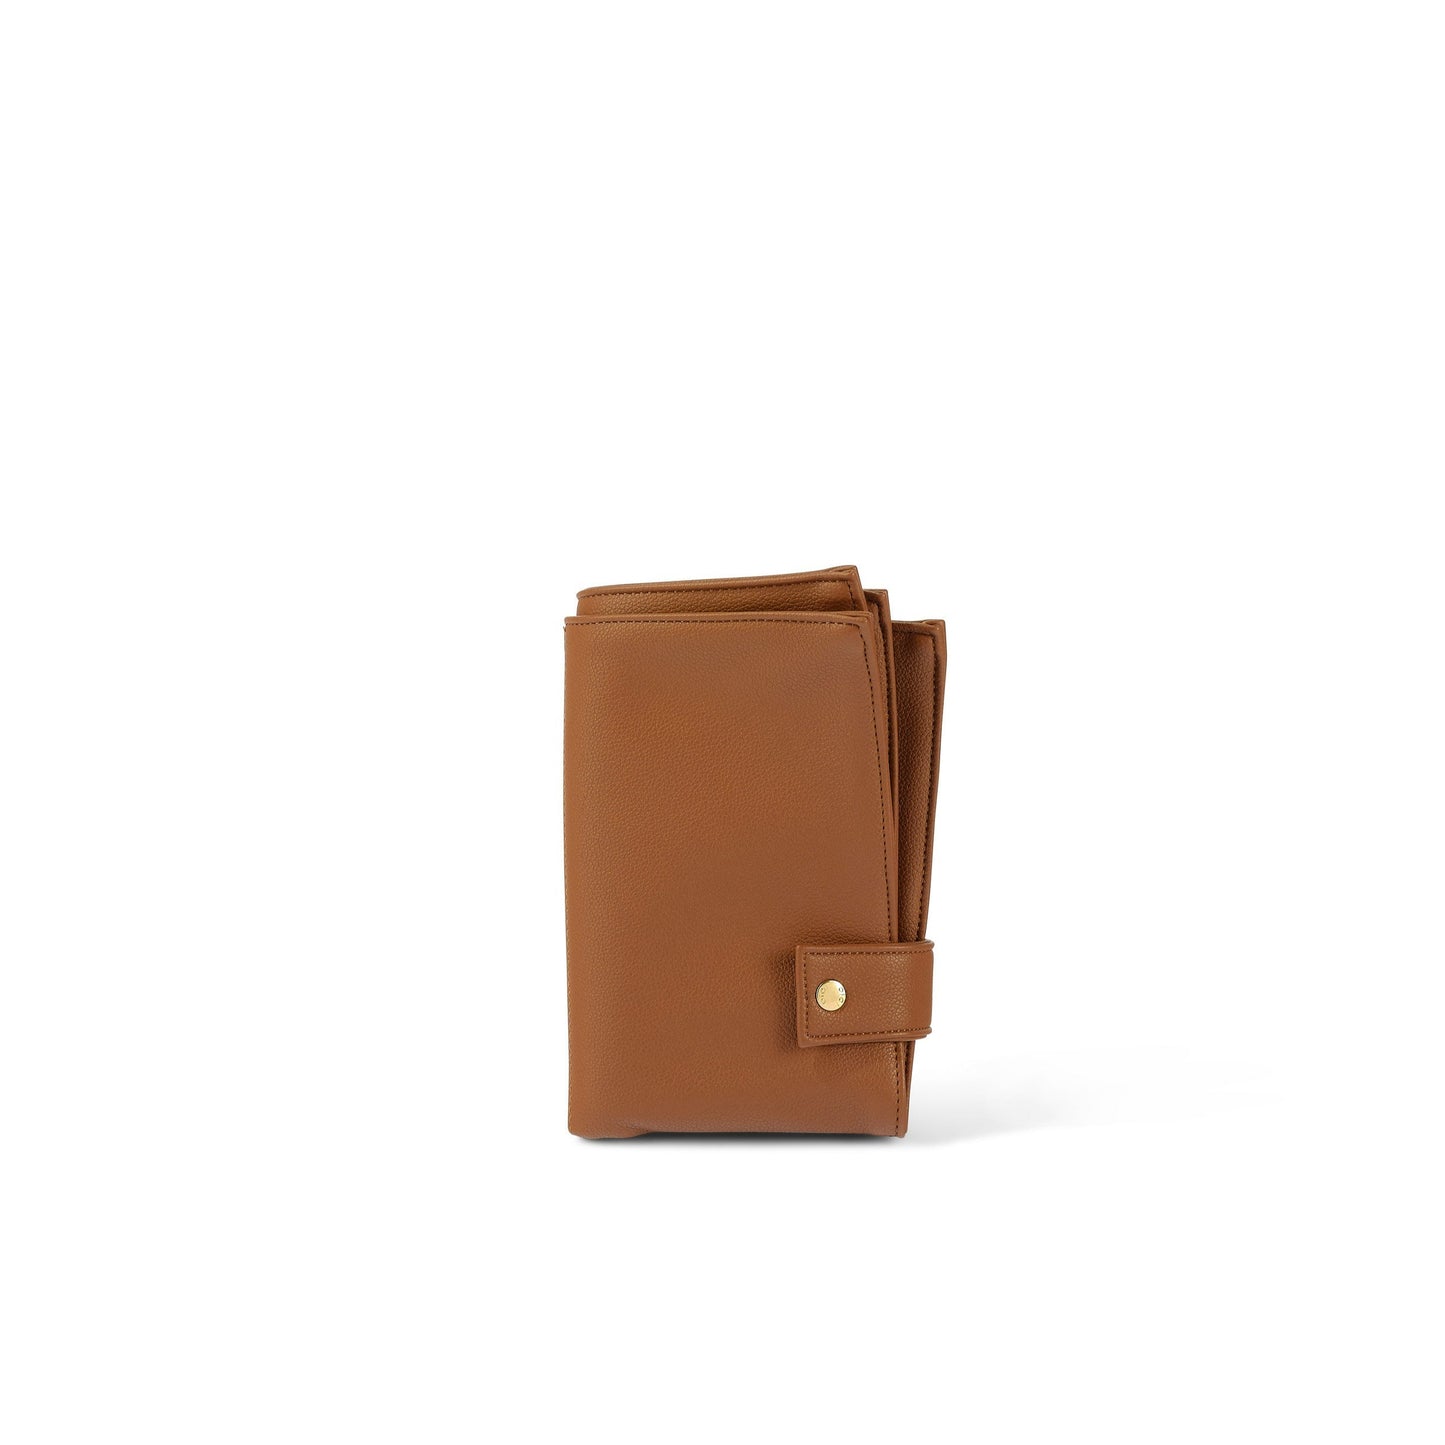 Diaper Changing Pouch - Chestnut Brown Vegan Leather